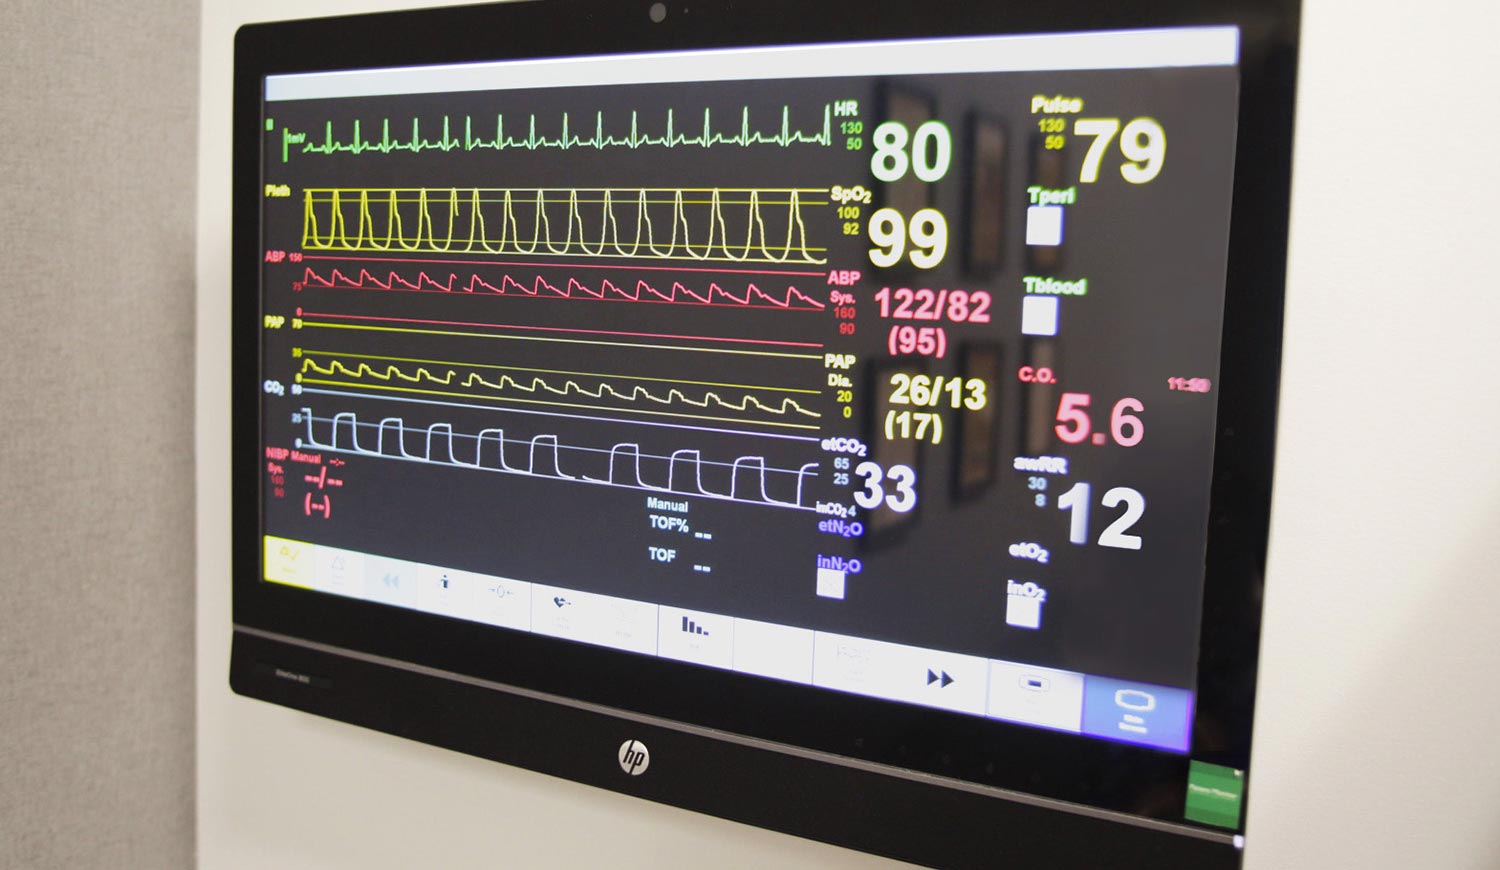 Vital signs displays in each simulation room are driven directly by the simulation software controlling the mannequins, independent of the AV system.